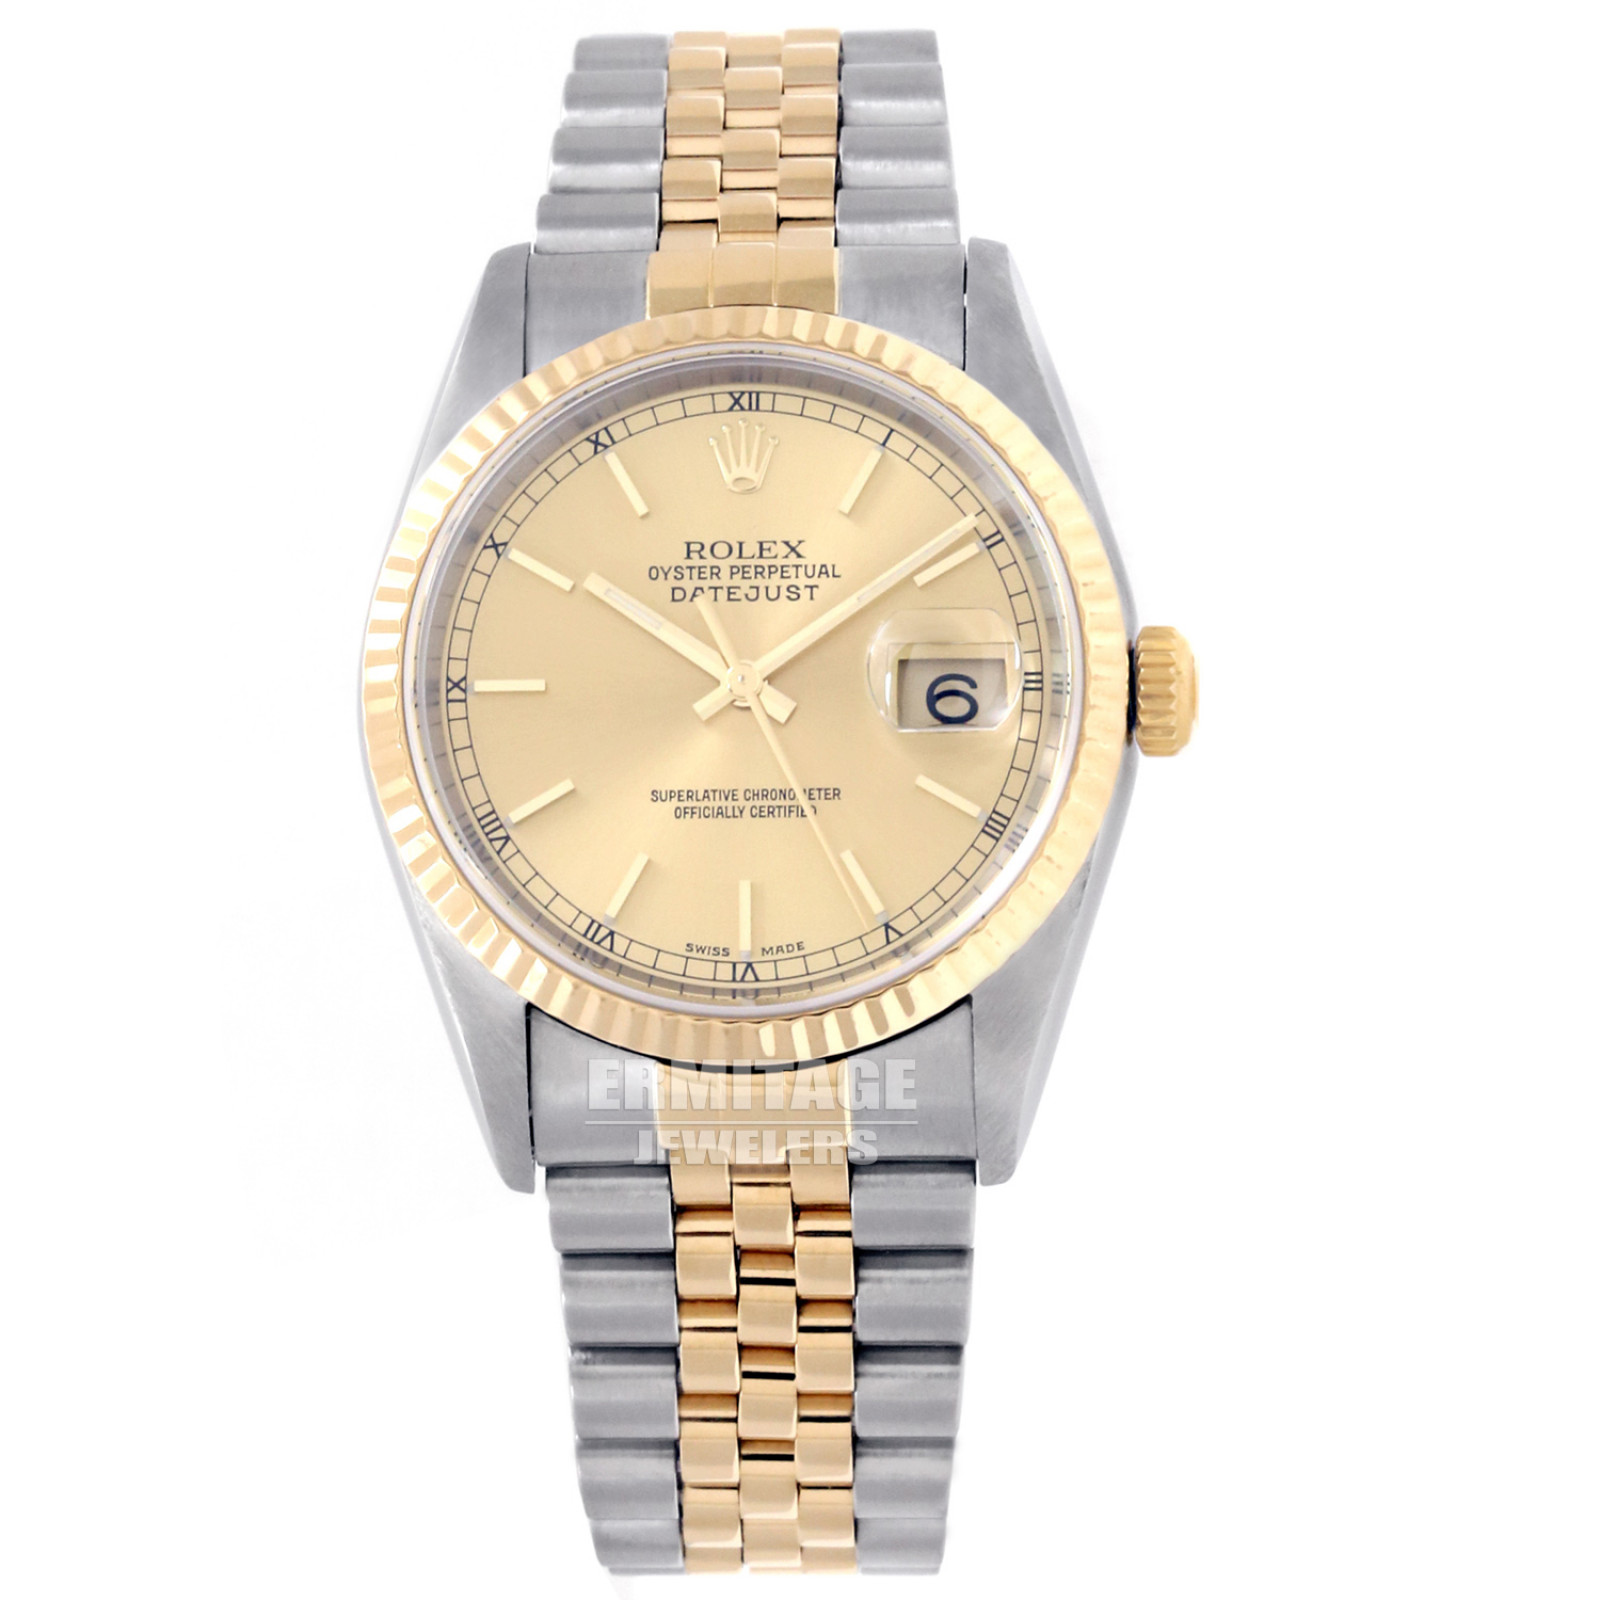 Sell Rolex Datejust 16233 with Champagne Dial